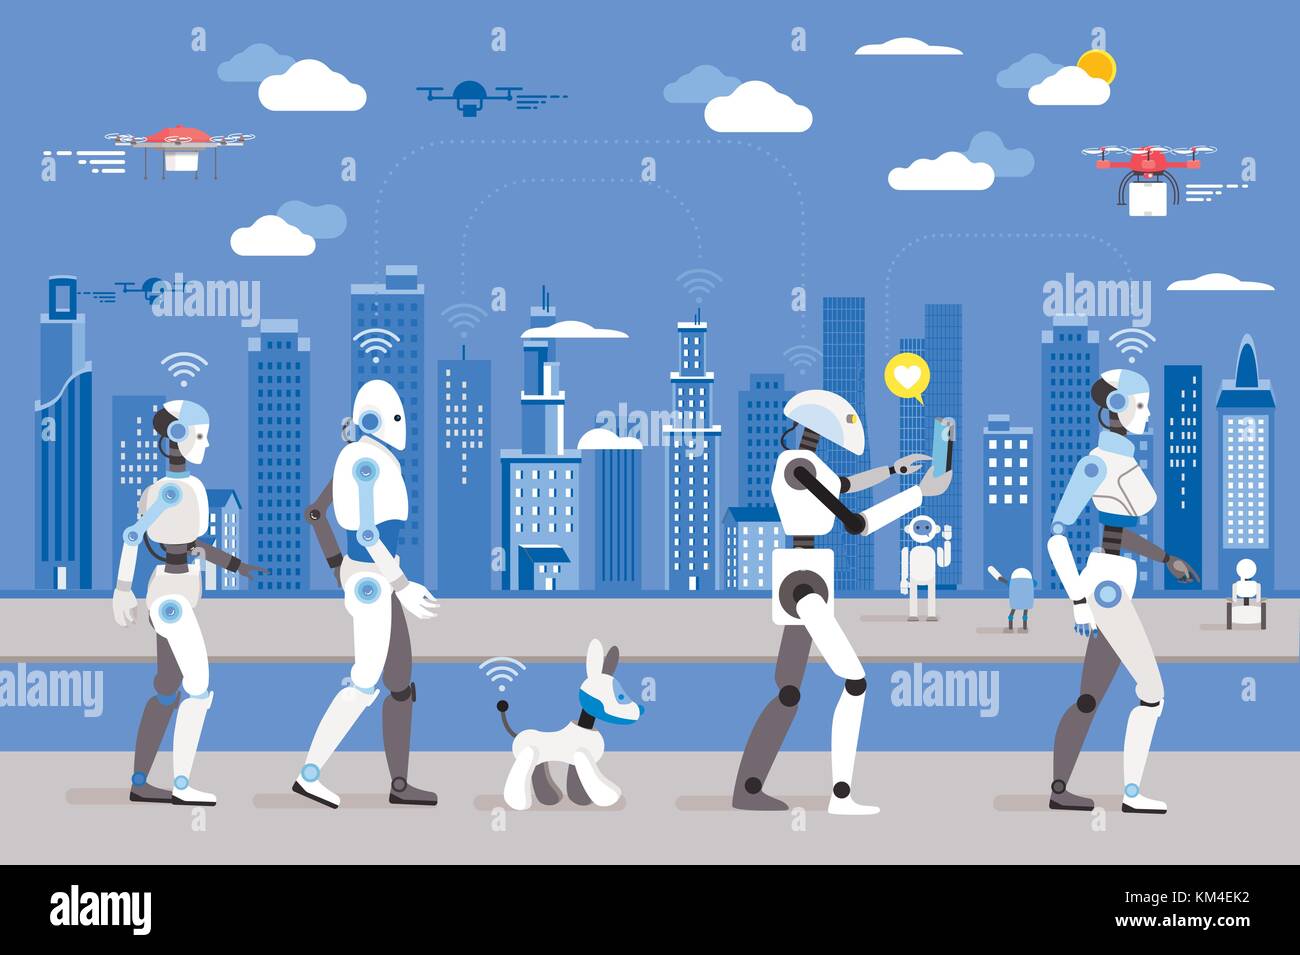 Android robots and a dog robot Walking in a Futuristic City.  Futuristic image of a near future. Android robots fly in the sky. Stock Vector